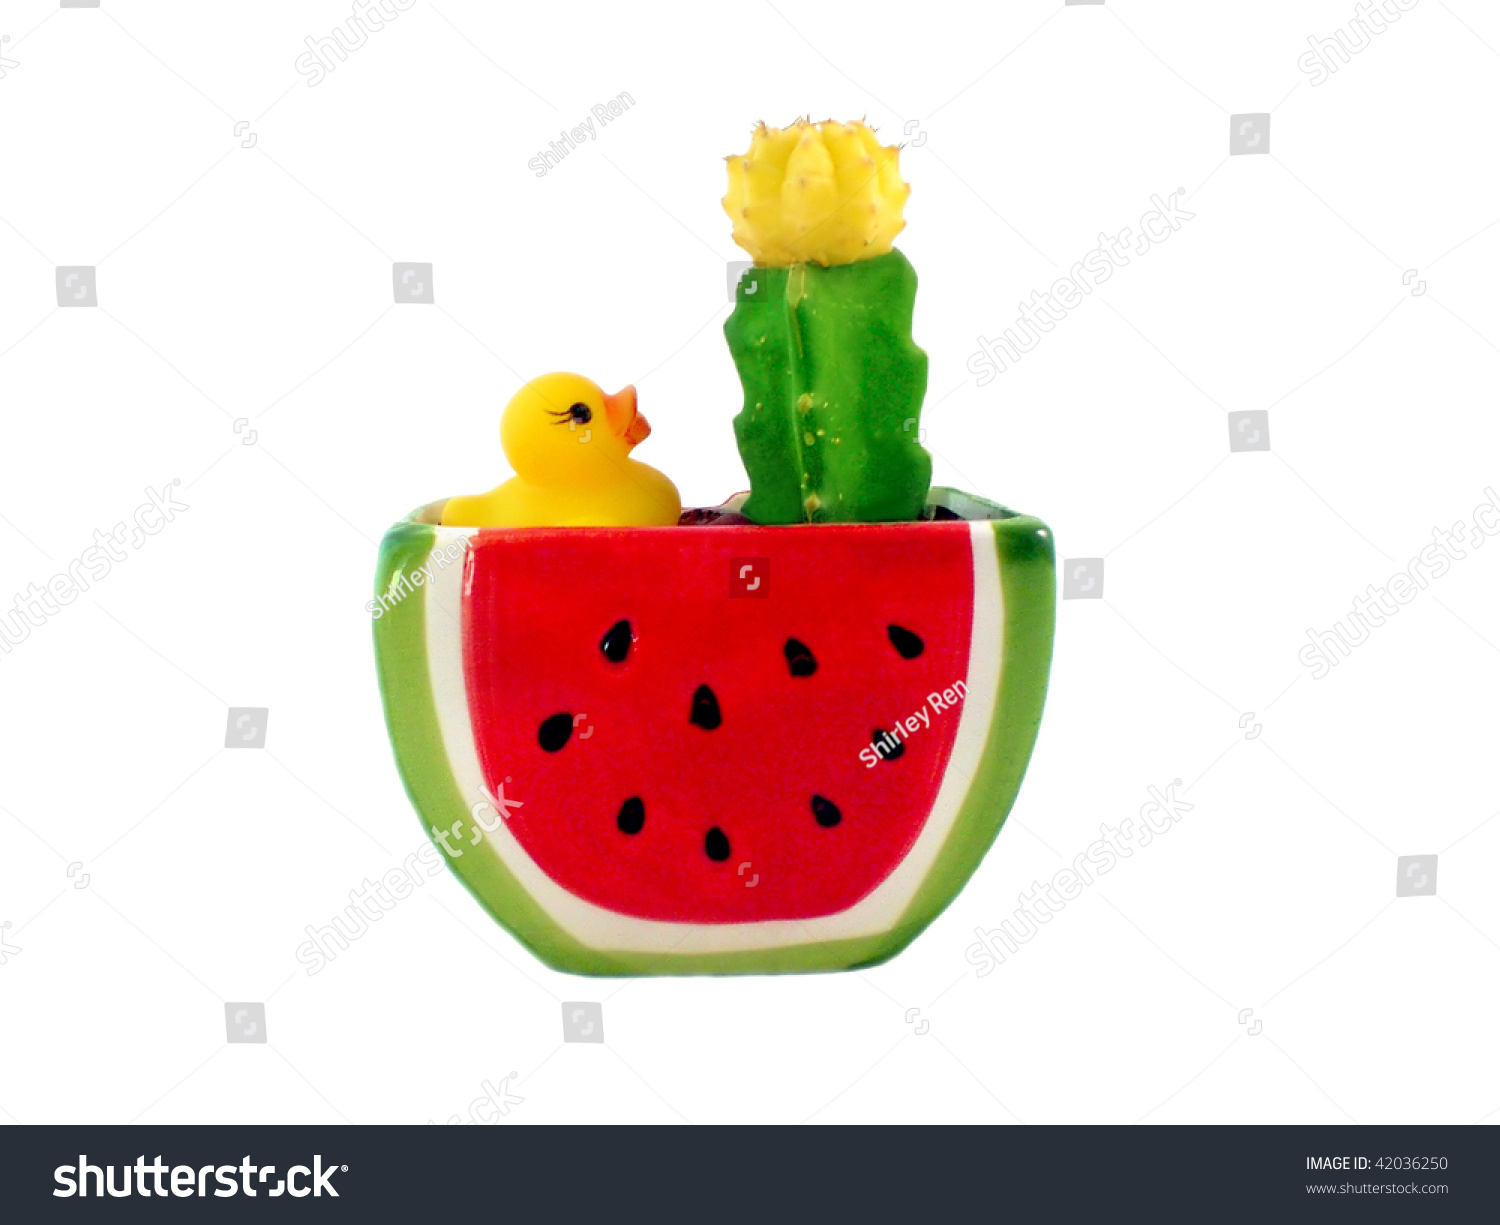 stock-photo-cactus-flowerpot-of-watermelon-shape-with-a-yellow-duck-toy-42036250.jpg